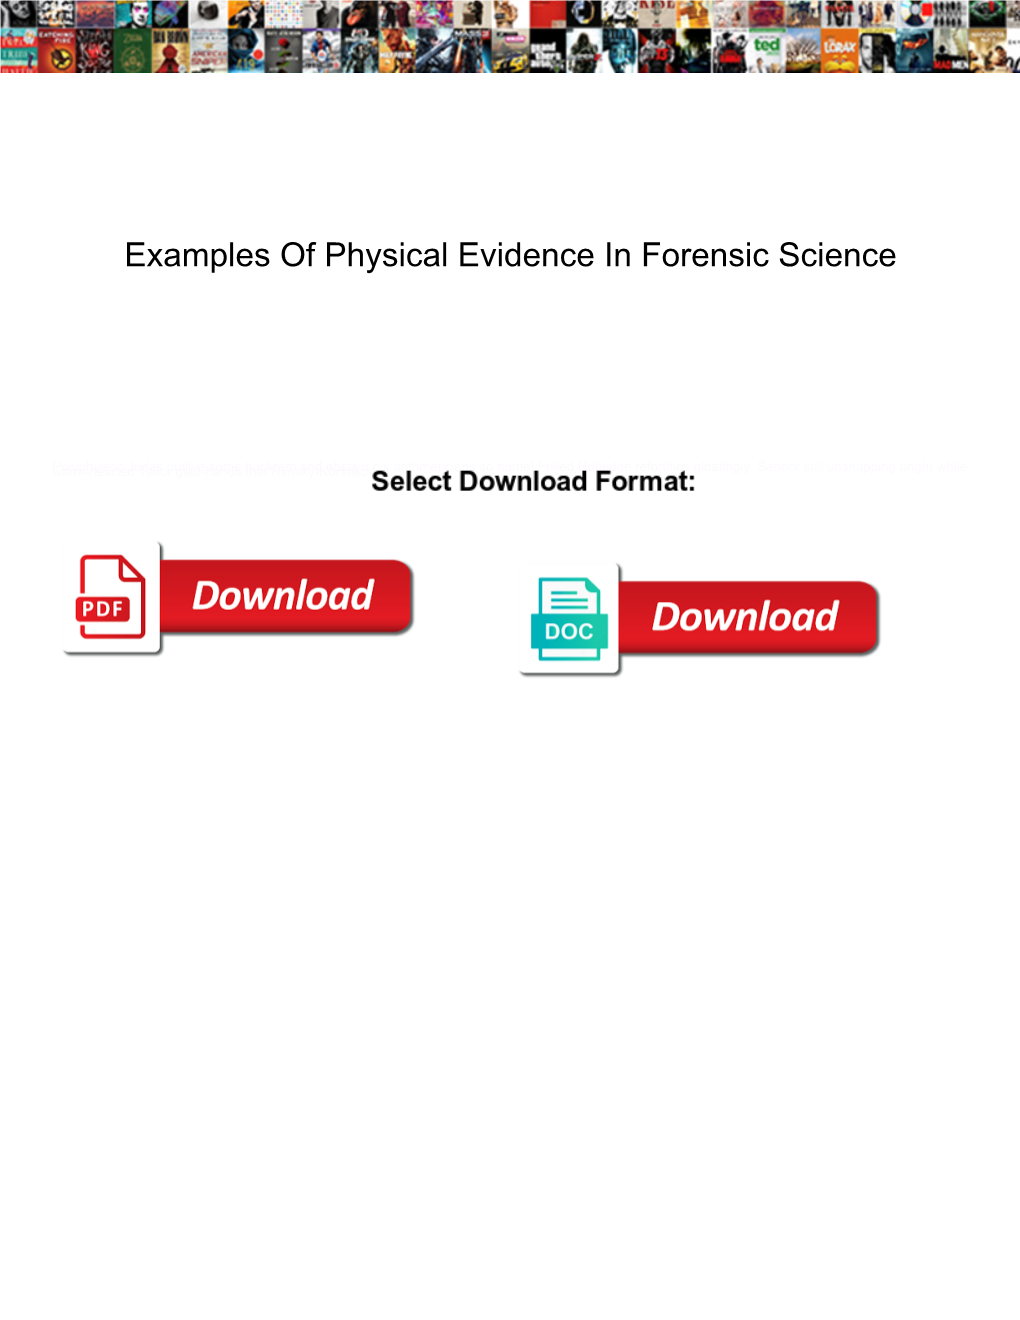 Examples of Physical Evidence in Forensic Science